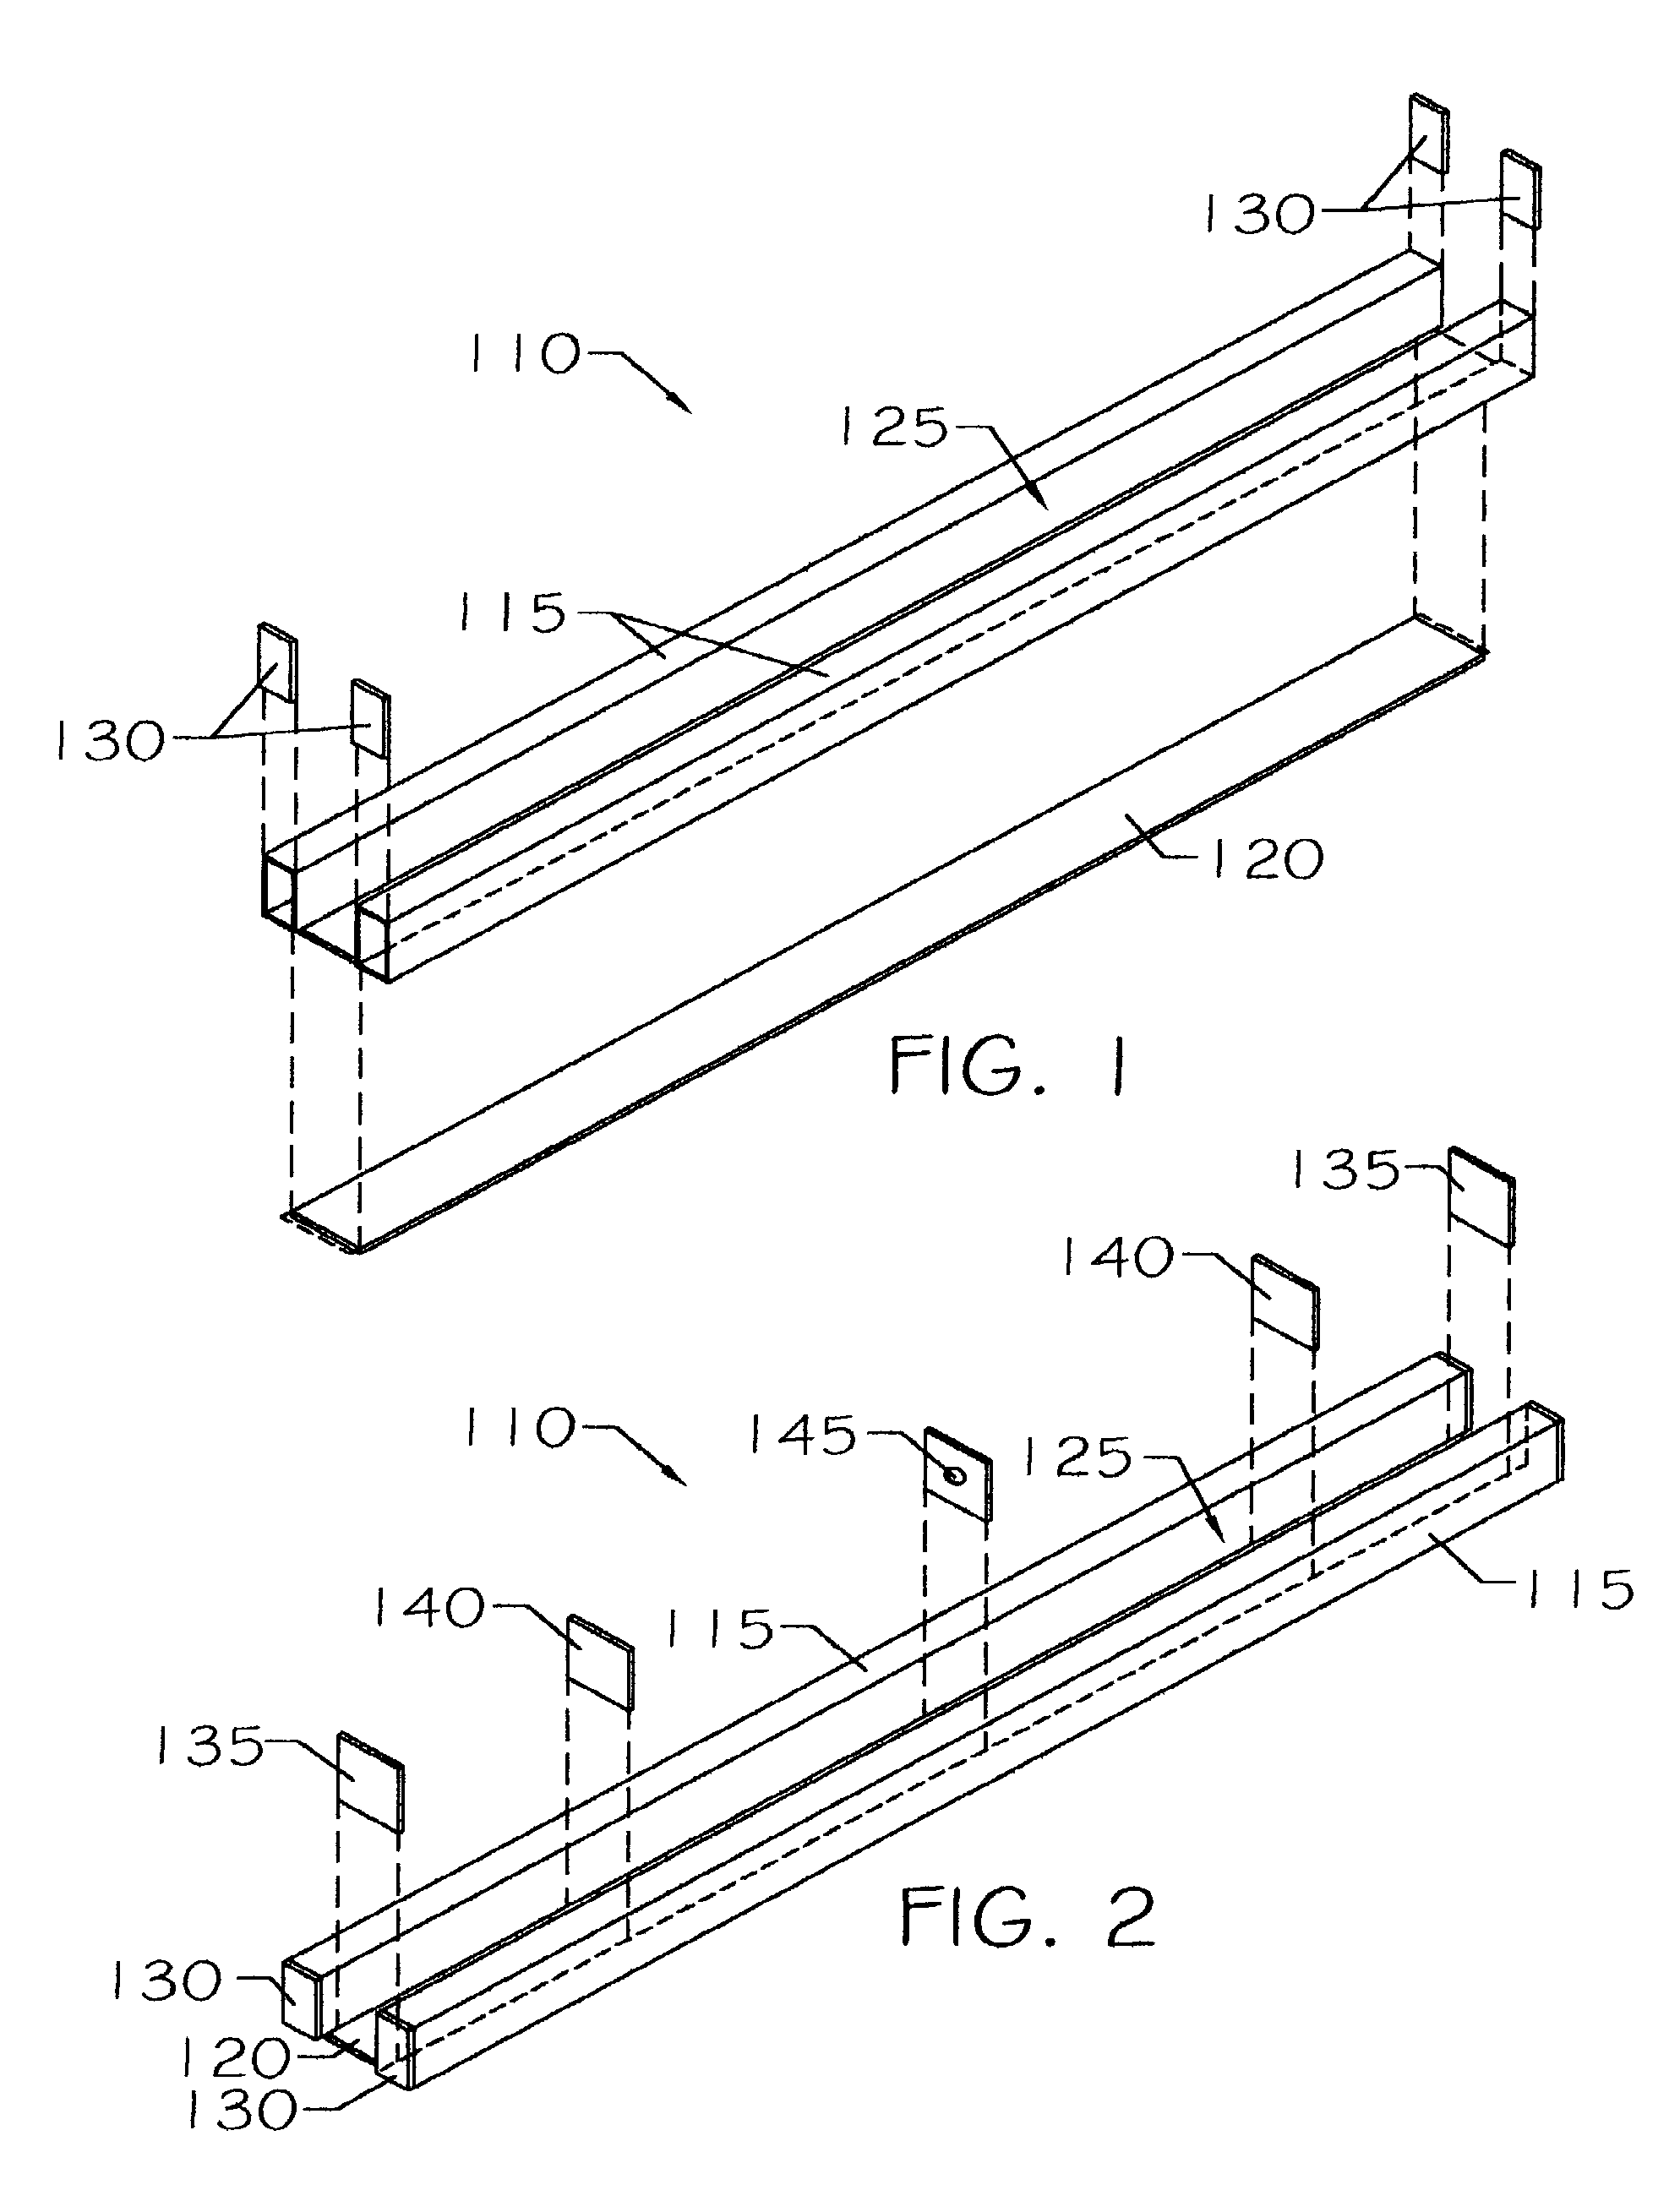 Method for dry isolation of a water passage of a dam